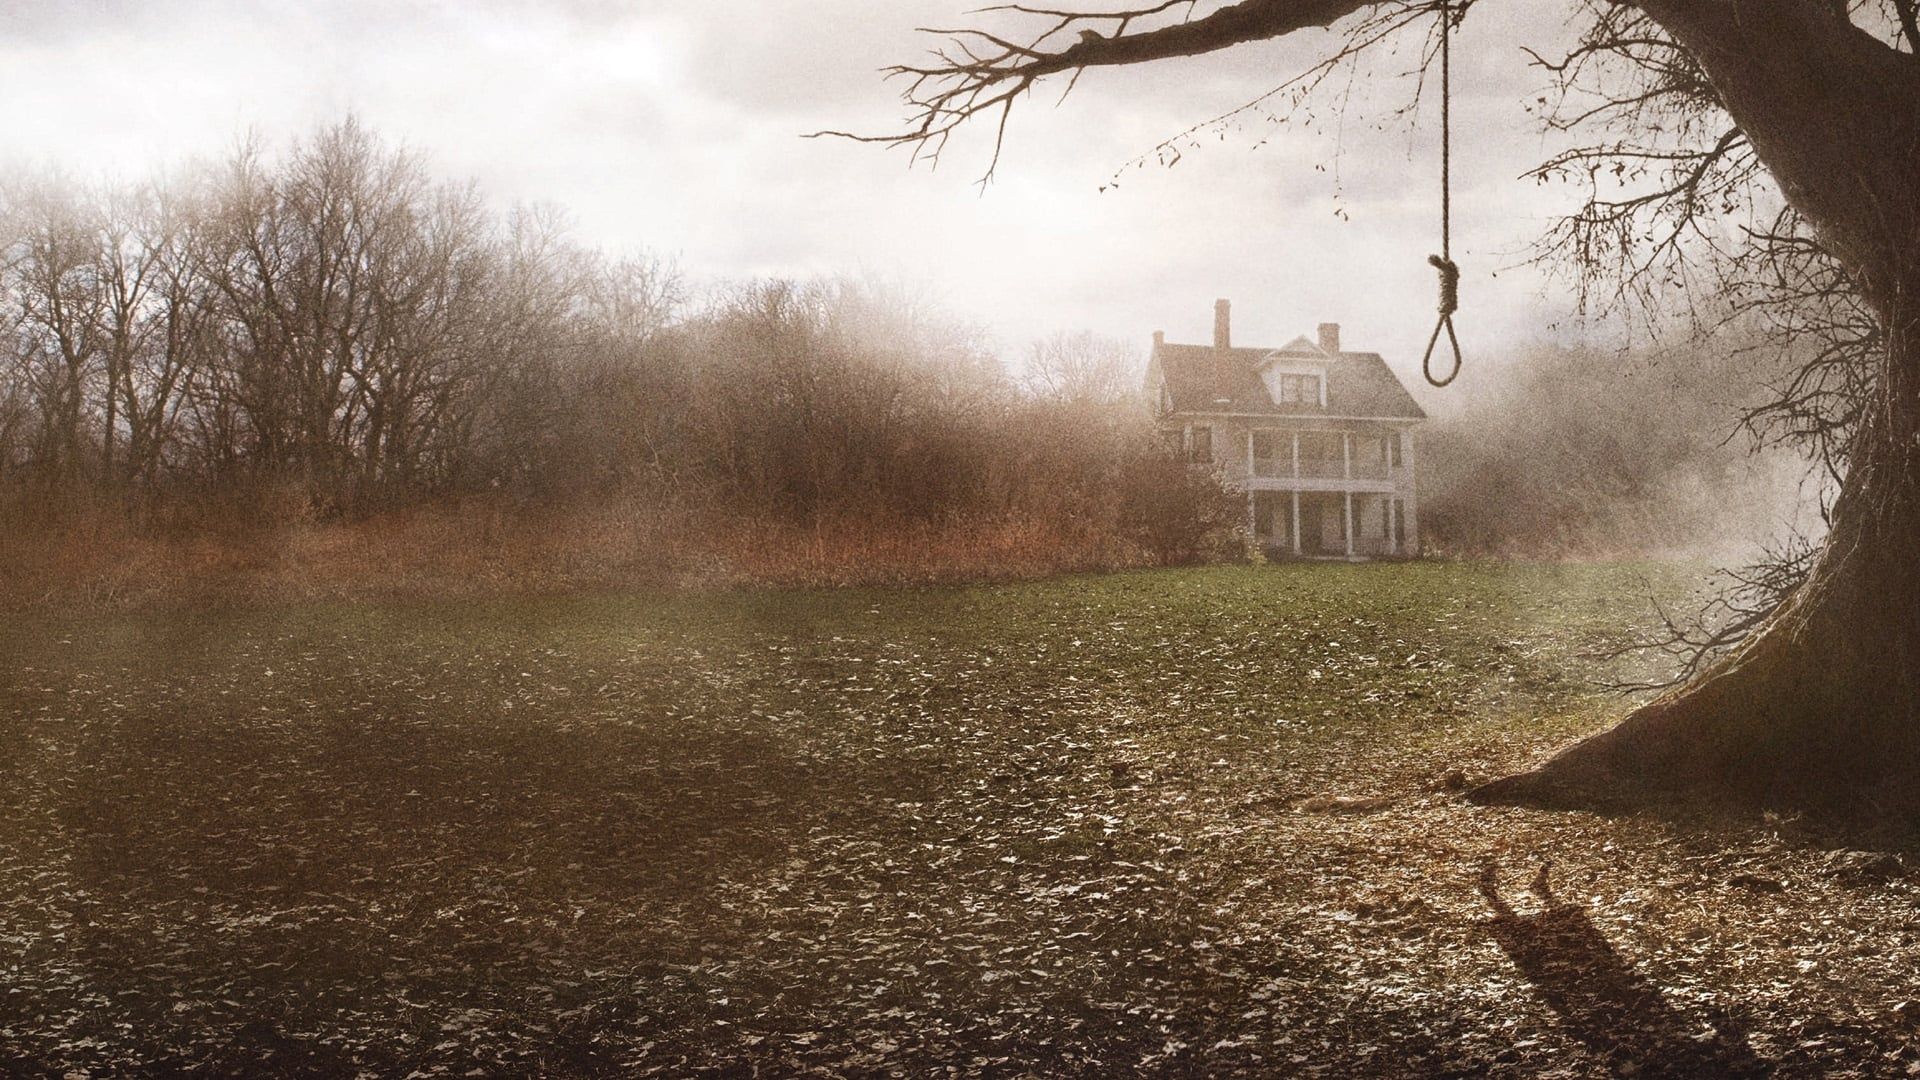 The Conjuring Backdrop